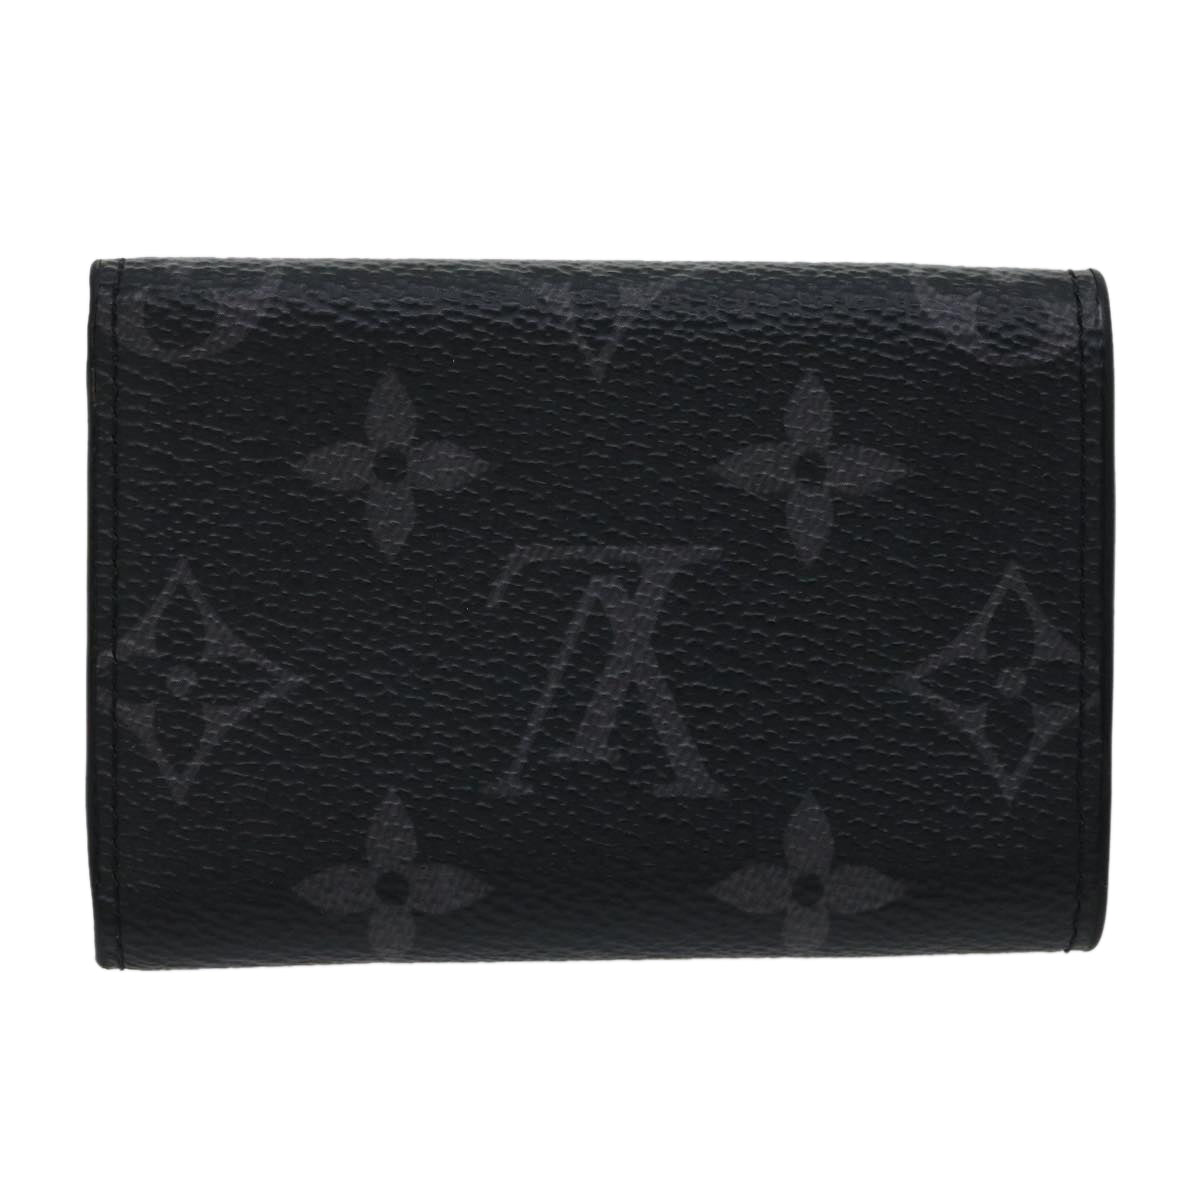 LOUISVUITTON Monogram Eclipse Reverse DiscoveryCompact Wallet M45417 Auth 30461A - 0